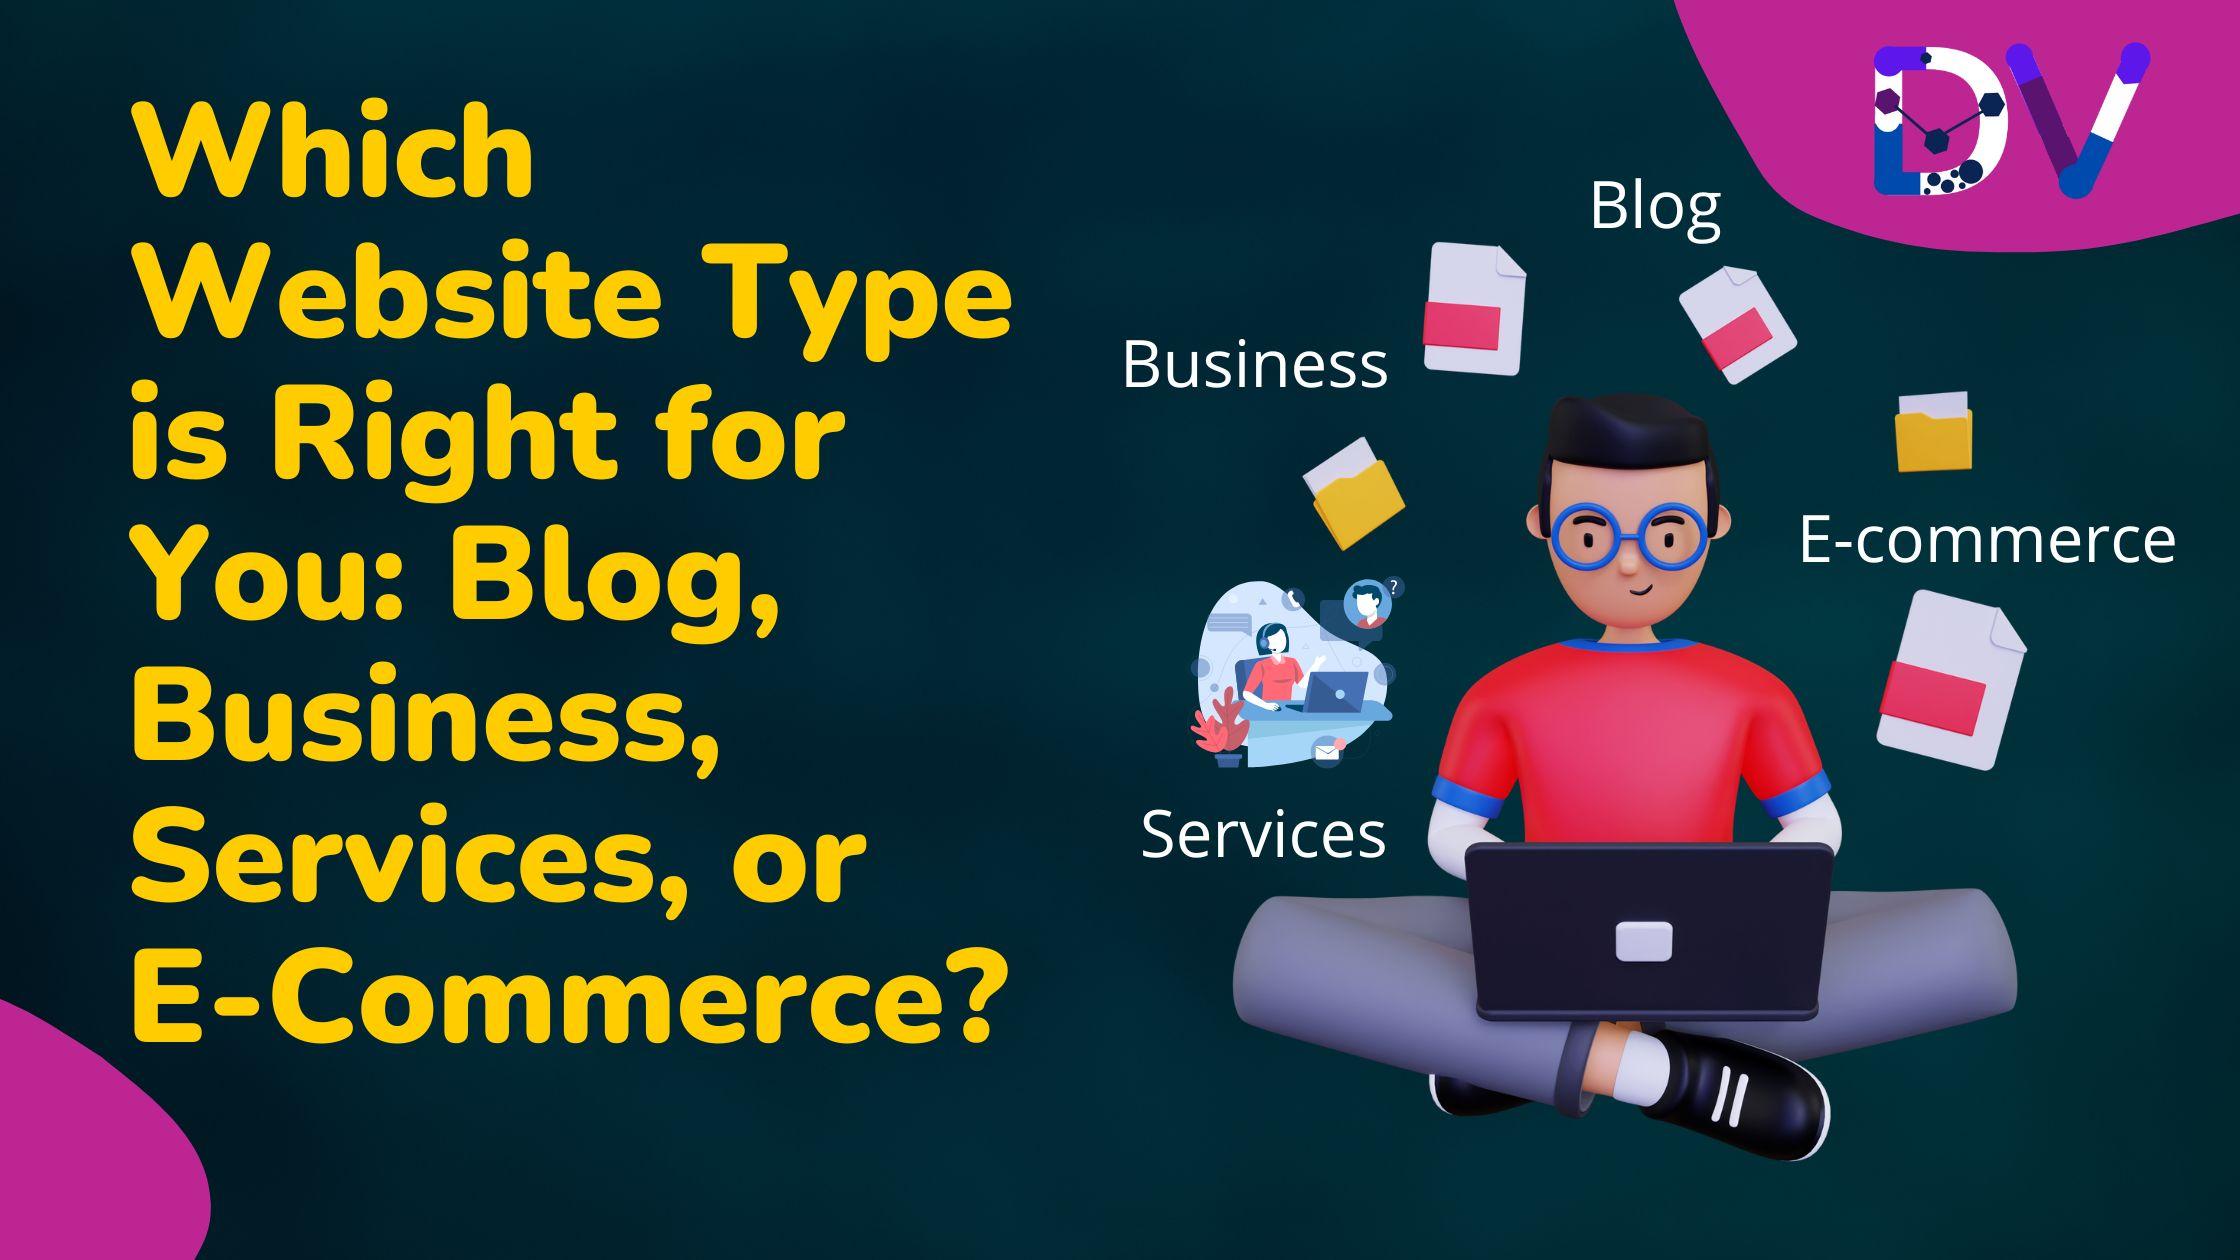 Choosing the Right Type of Website for Your Needs